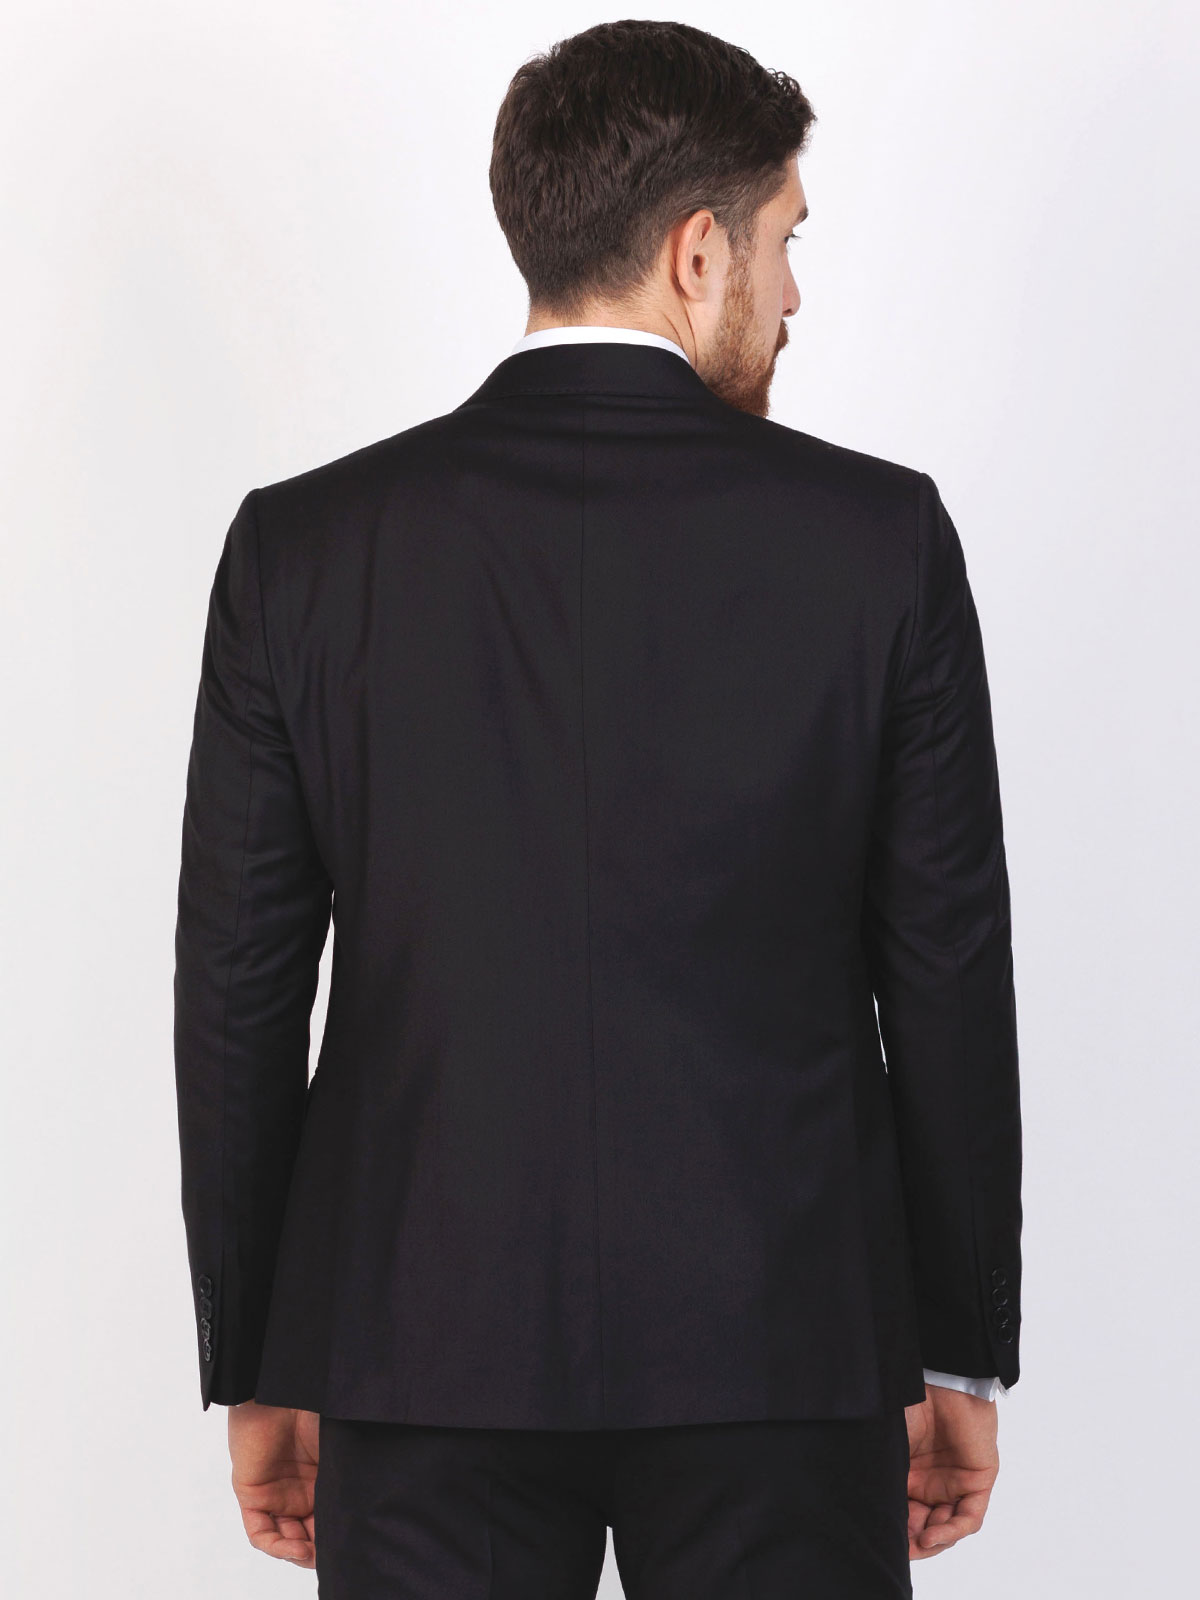 Elegant jacket with a fitted silhouette - 64119 € 138.36 img4